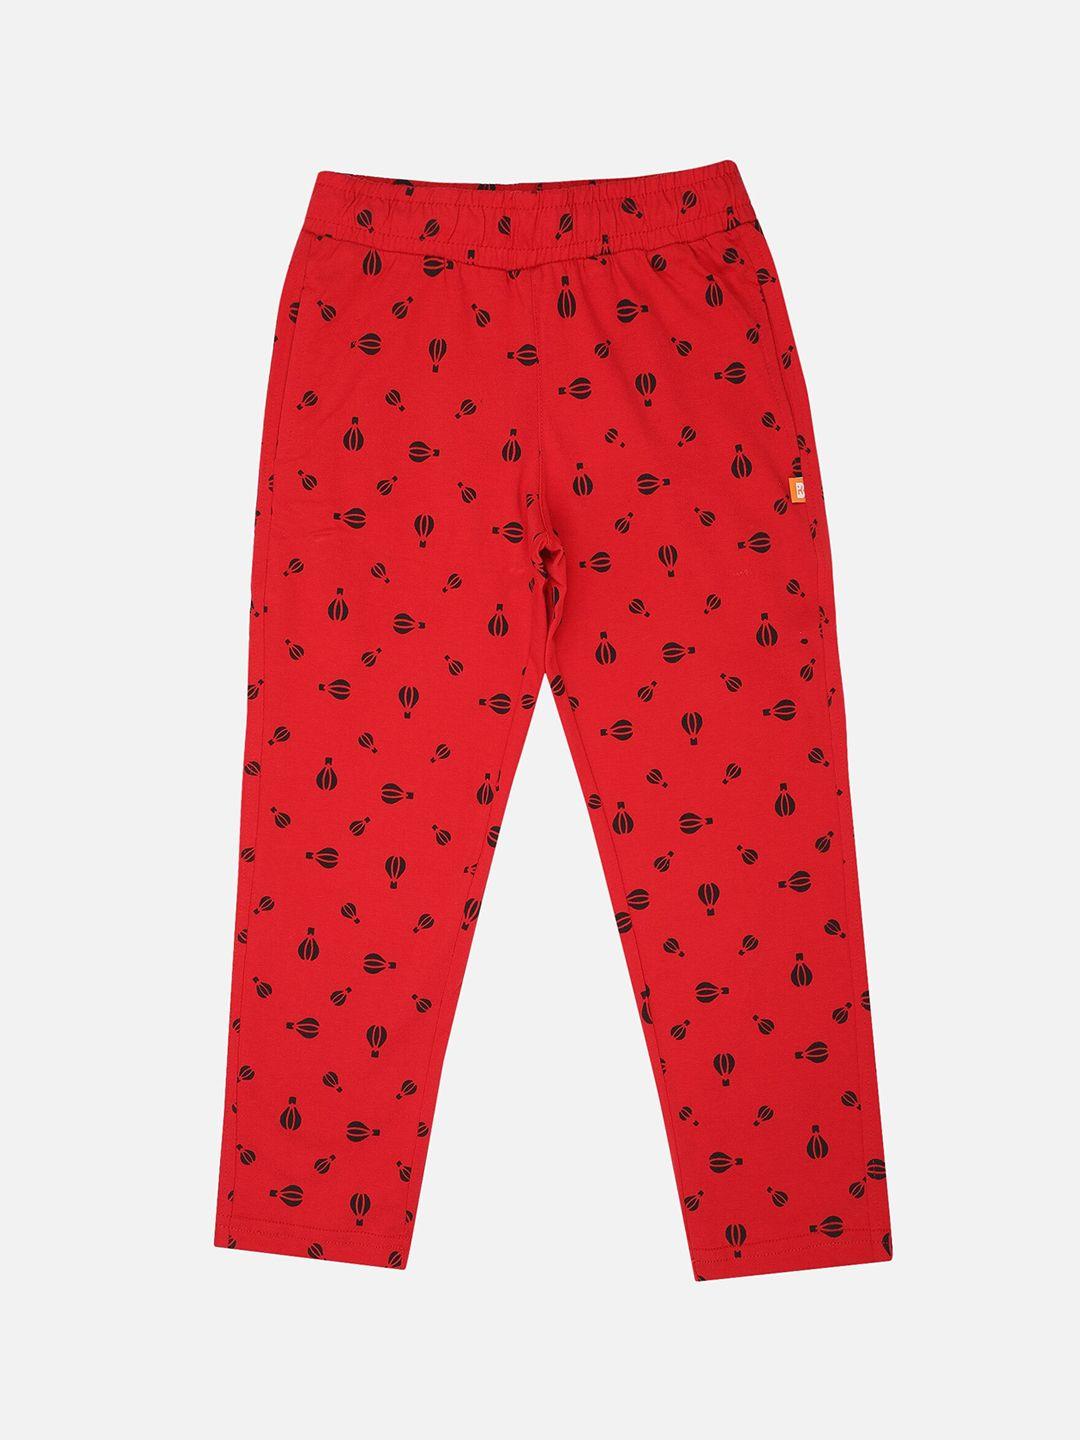 proteens-boys-printed-cotton-track-pants